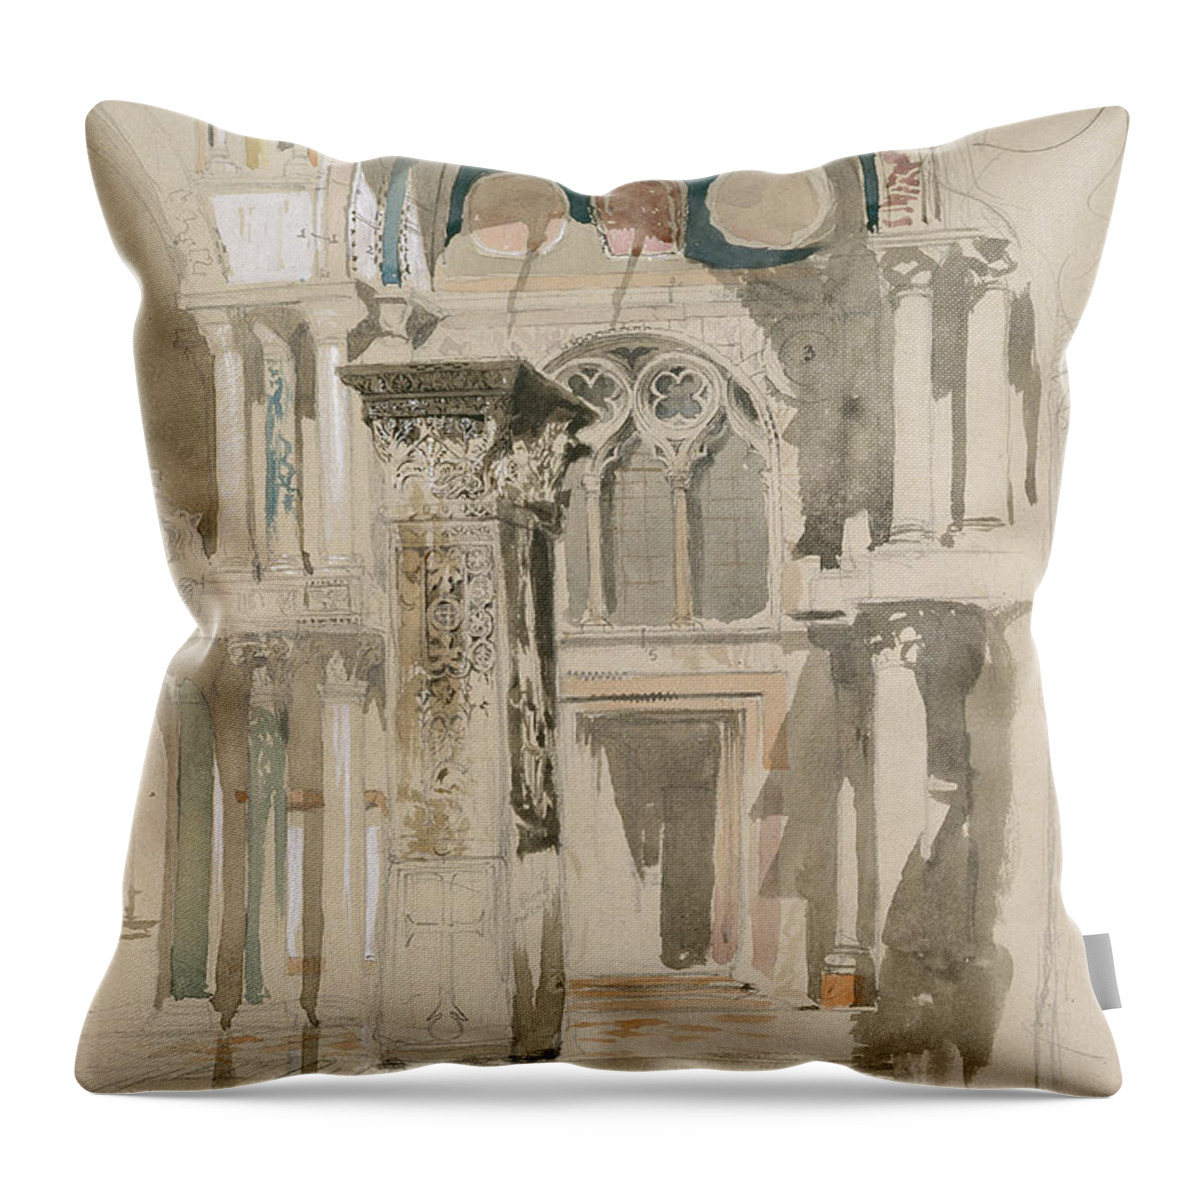 Ruskin Throw Pillow featuring the painting Part of Saint Mark's Basilica, Venice Sketch after Rain by John Ruskin